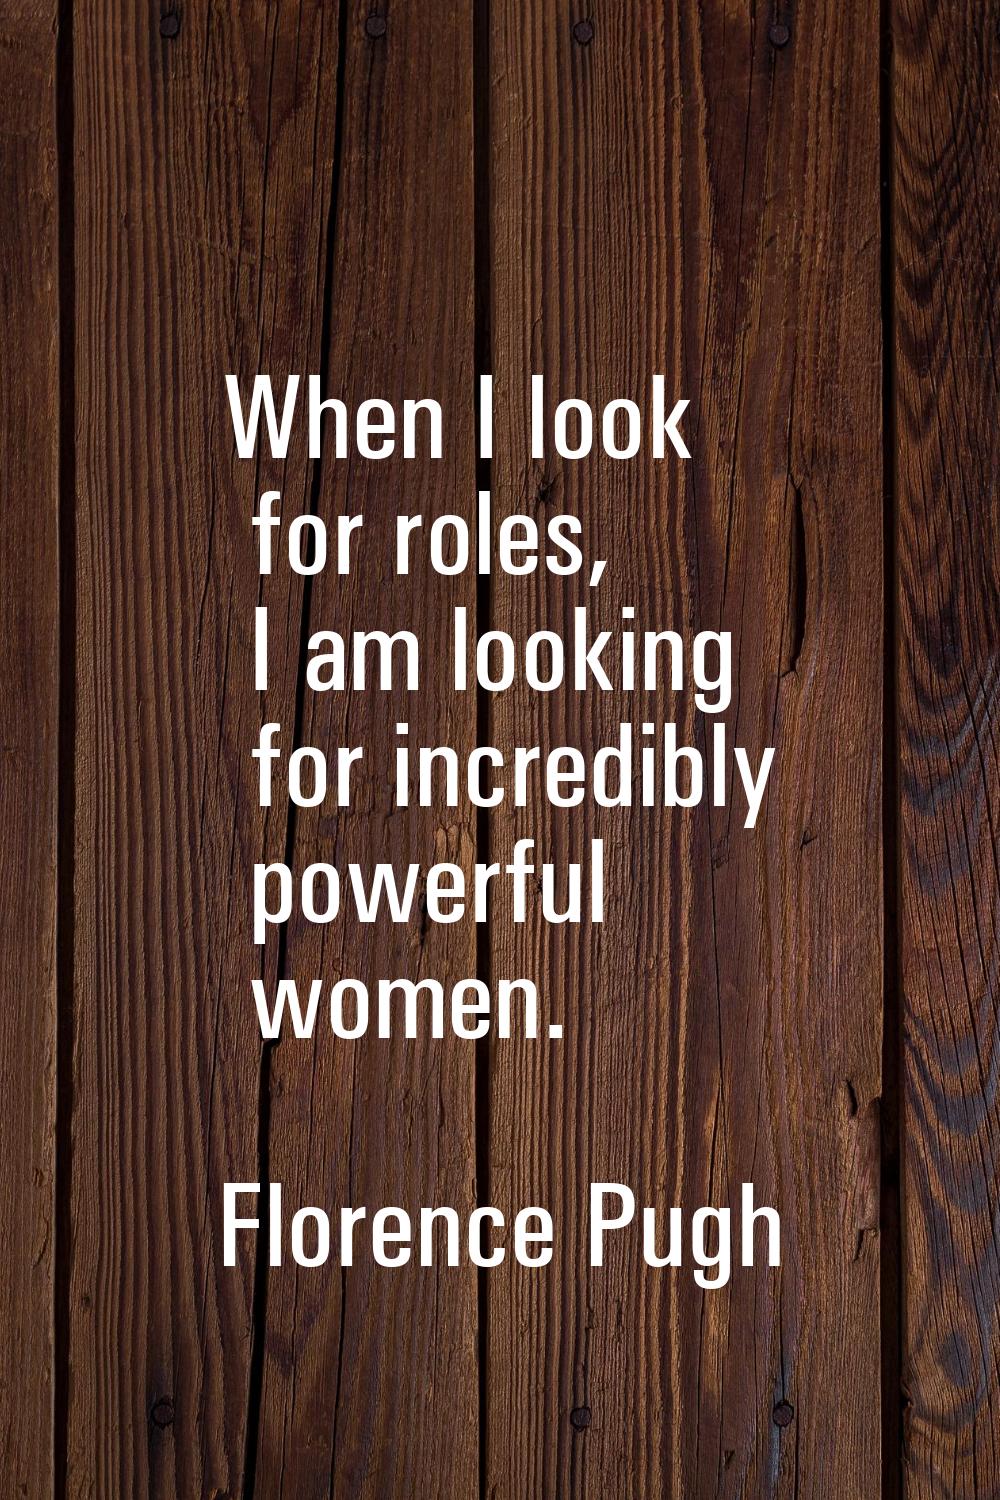 When I look for roles, I am looking for incredibly powerful women.